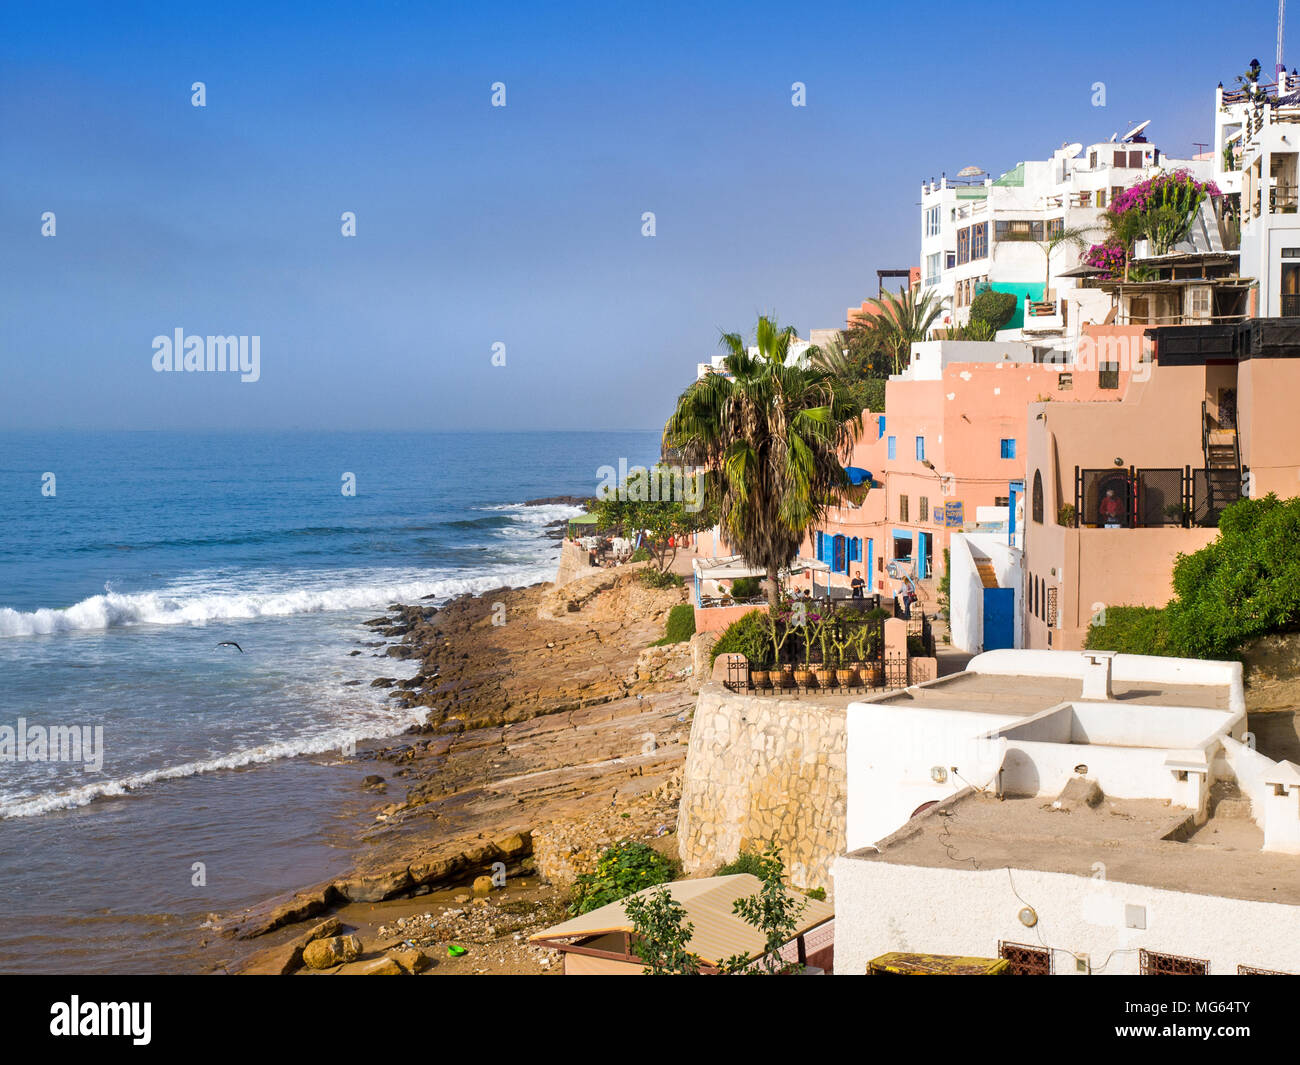 The coastal town of Taghzoute / Taghzout, a popular surf destination, Morocco Stock Photo